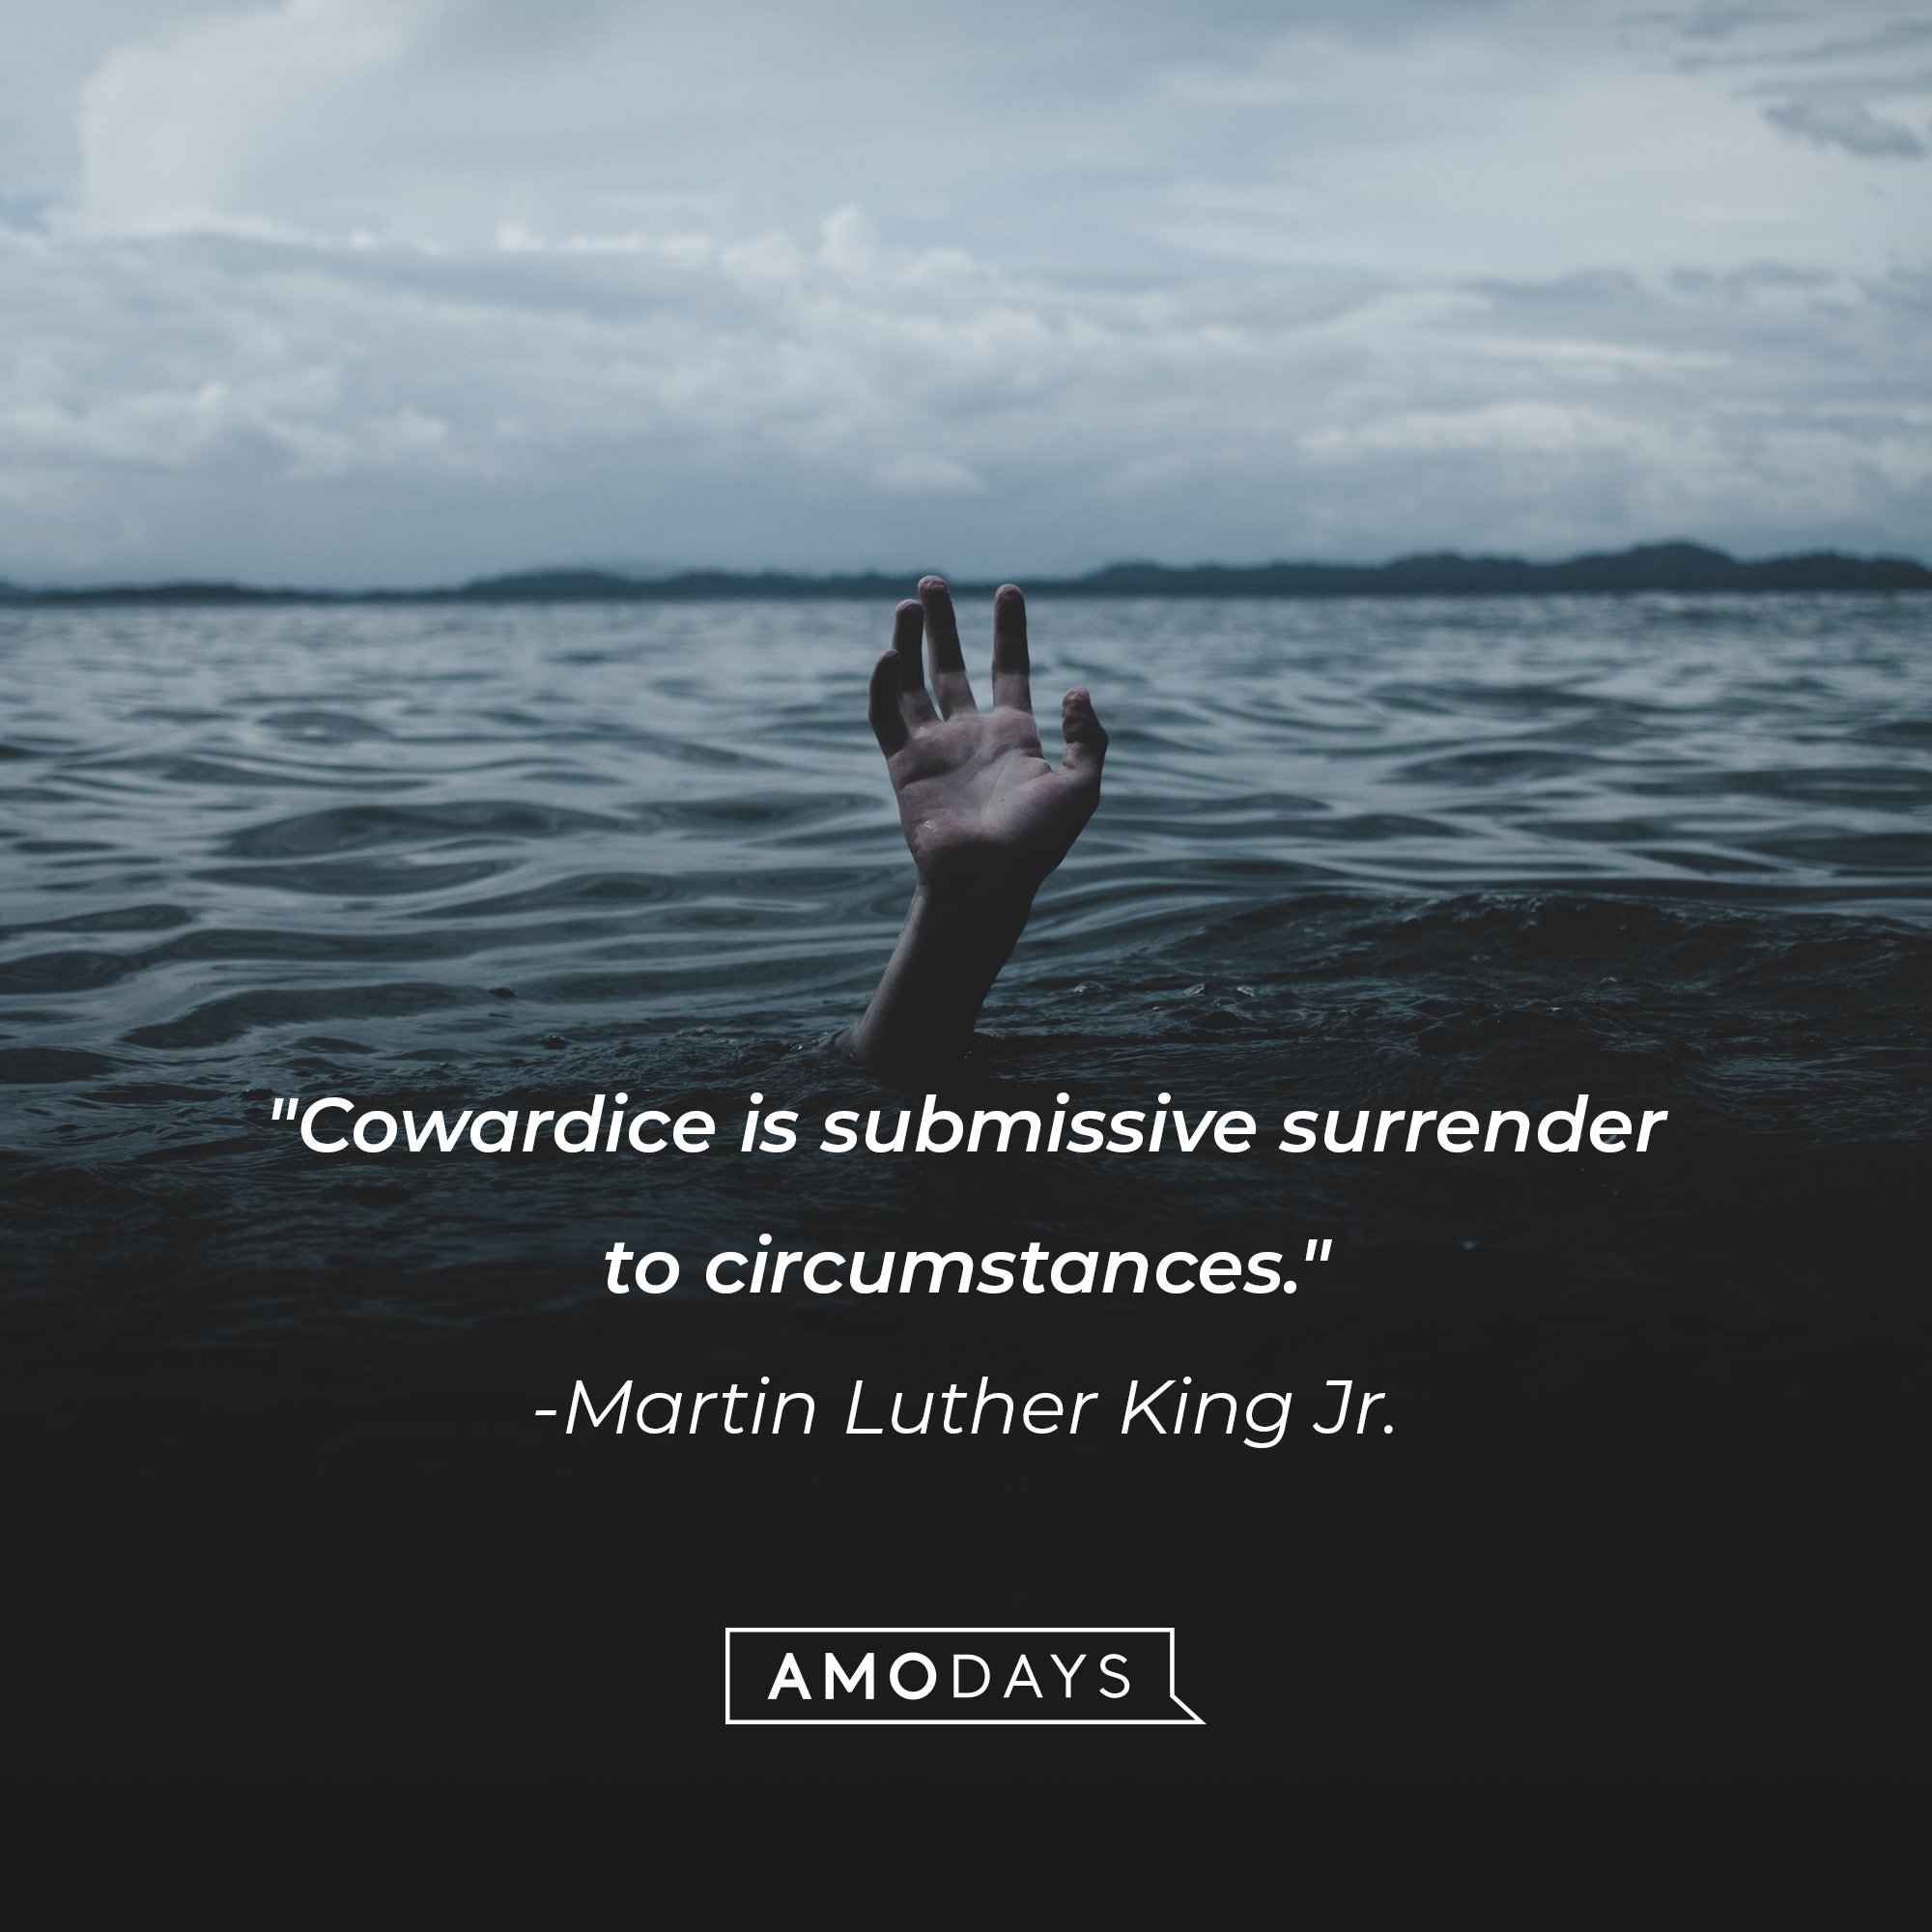 Martin Luther King Jr.’s quote: "Cowardice is submissive surrender to circumstances." | Image: AmoDays